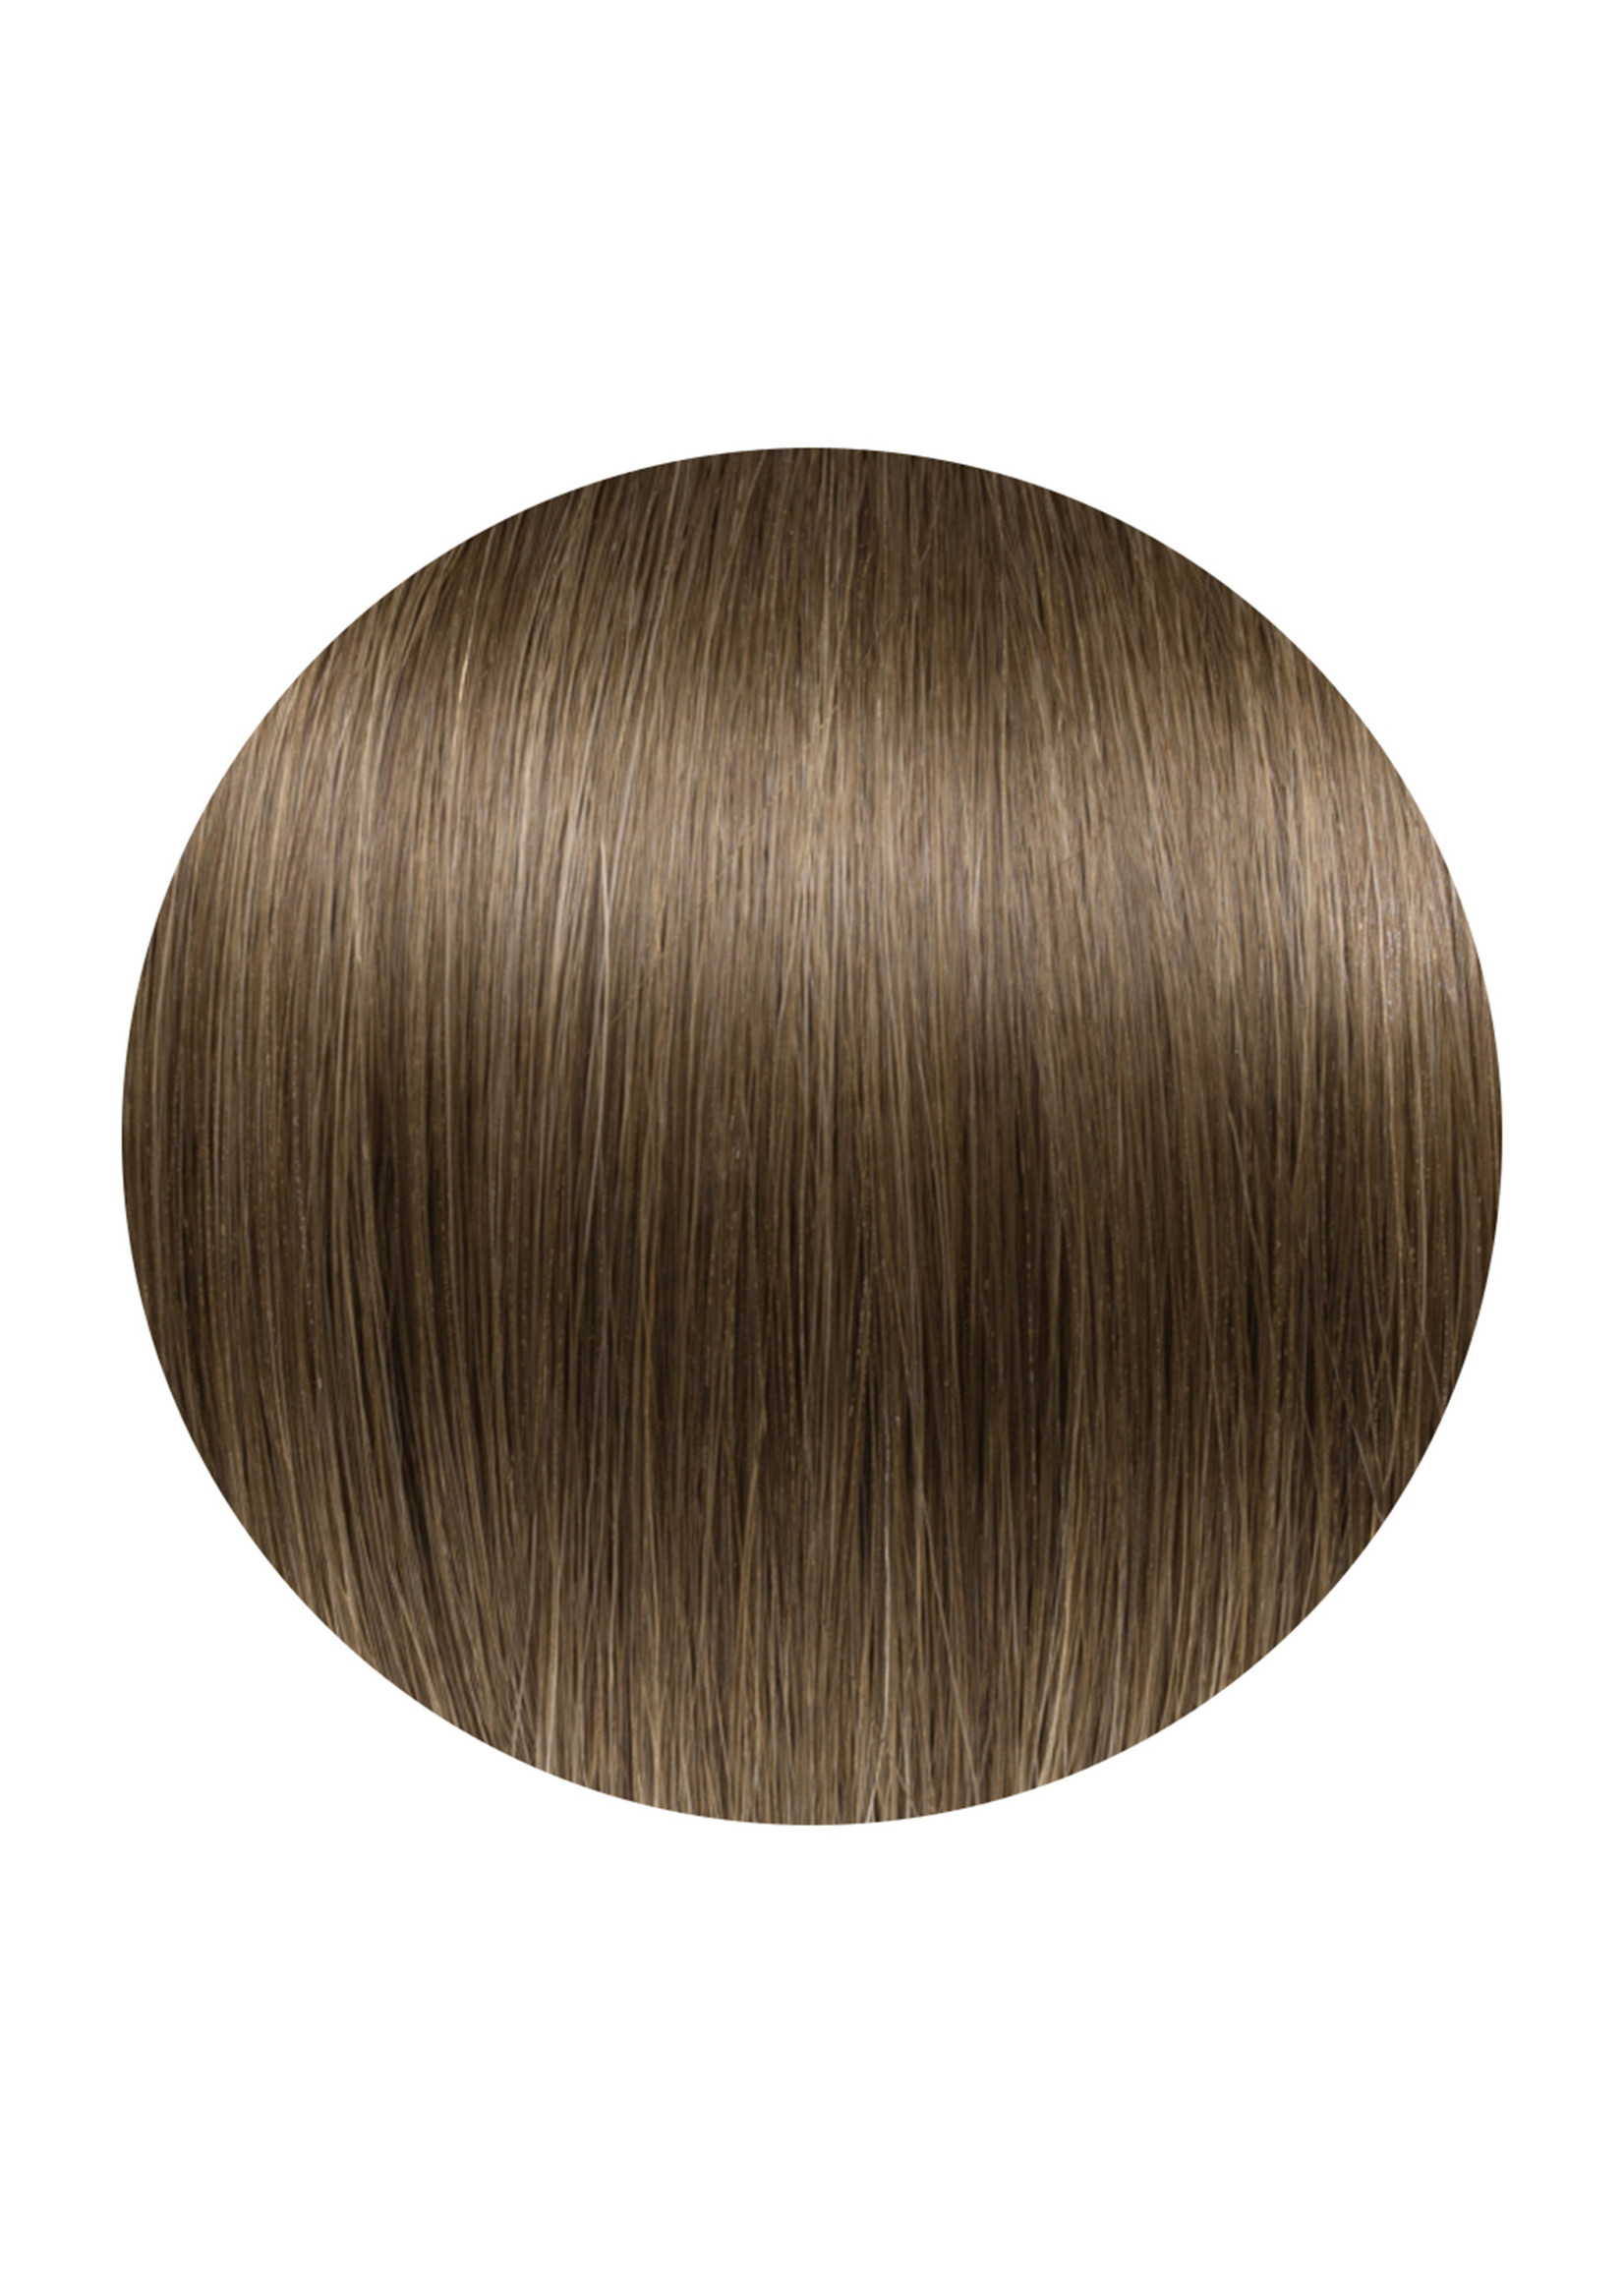 Seamless1 Seamless1 Human Hair Clip-in 5pc Hair Extensions 21.5 Inches - CoffeenCream Balayage